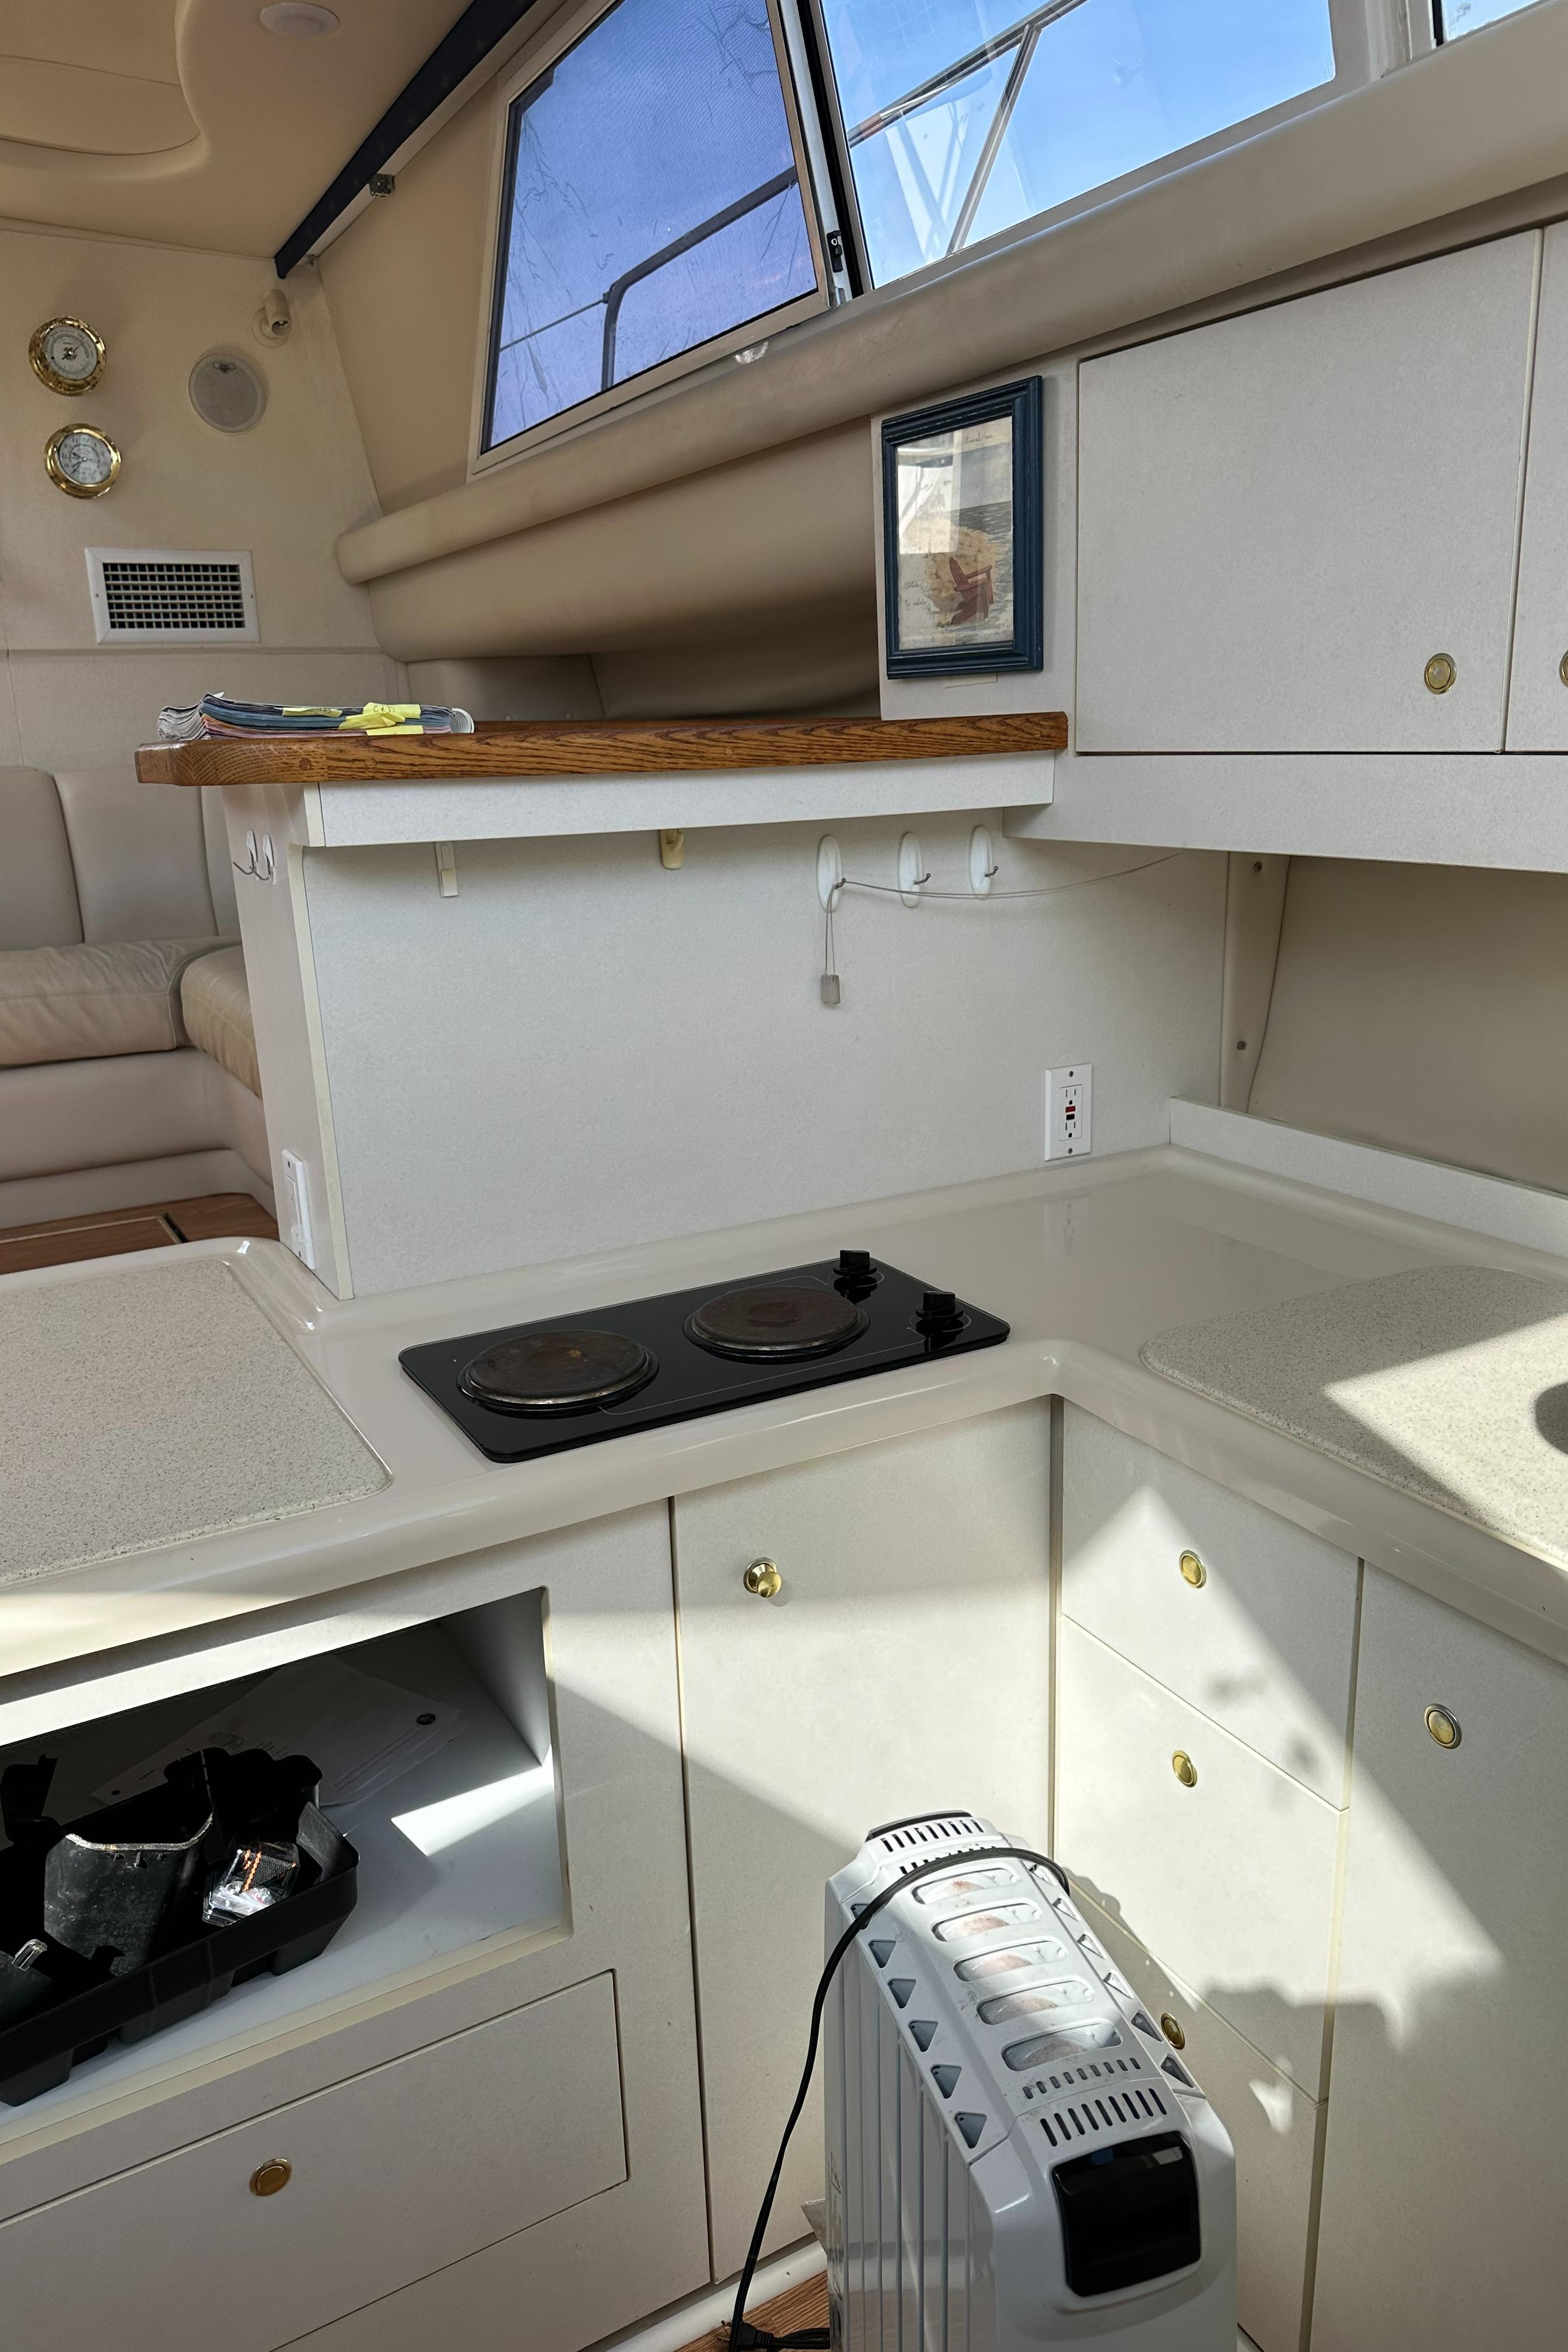 1997 Cruisers Yachts 3650 Aft Cabin